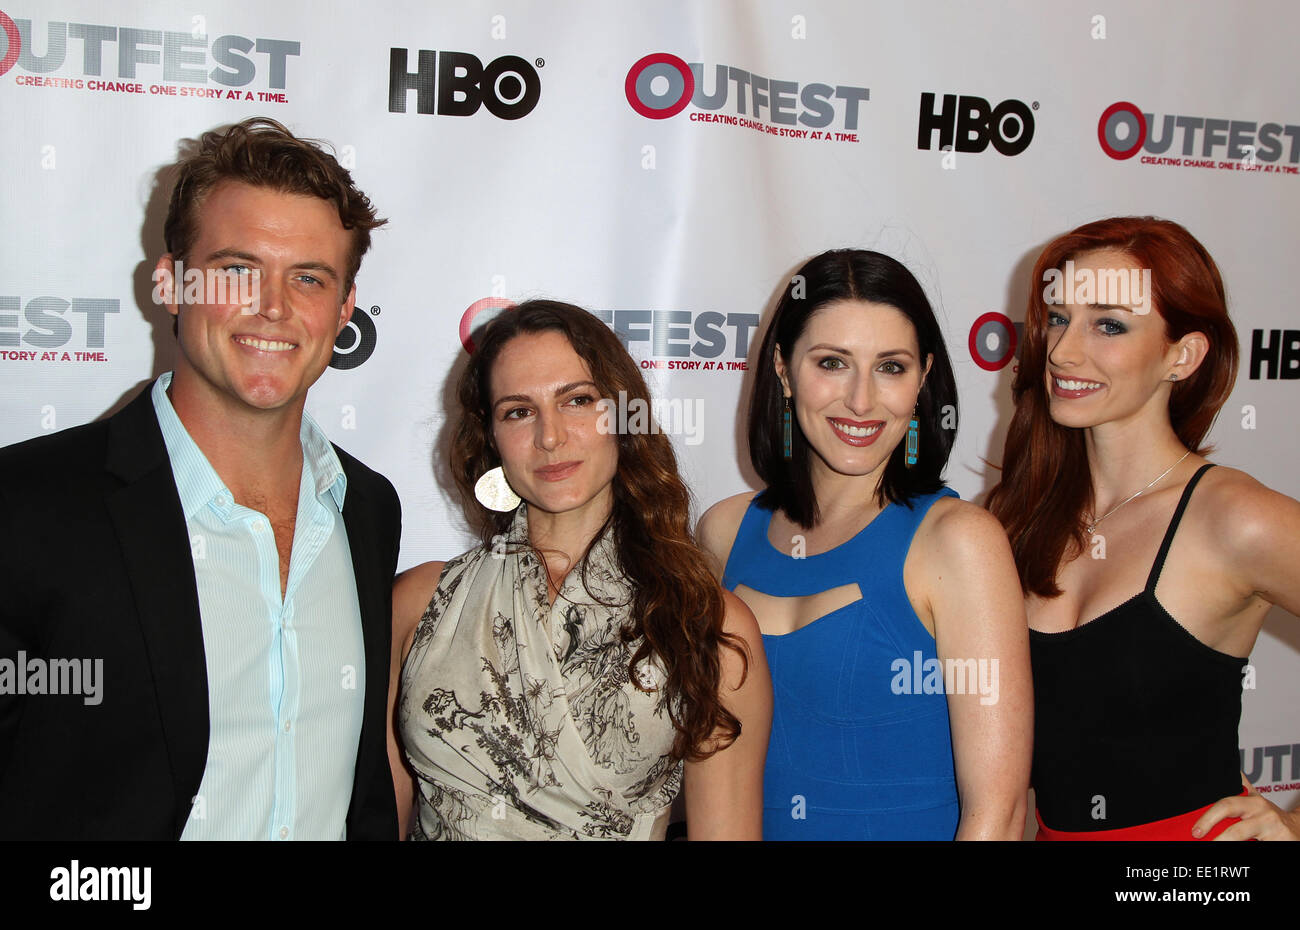 2014 Outfest Opening Night Gala Premiere Of Life Partner Arrivals  Featuring: Shannon Constantine,Sarah Connine,Najarra Townsend Where: Los Angeles, California, United States When: 10 Jul 2014 Stock Photo